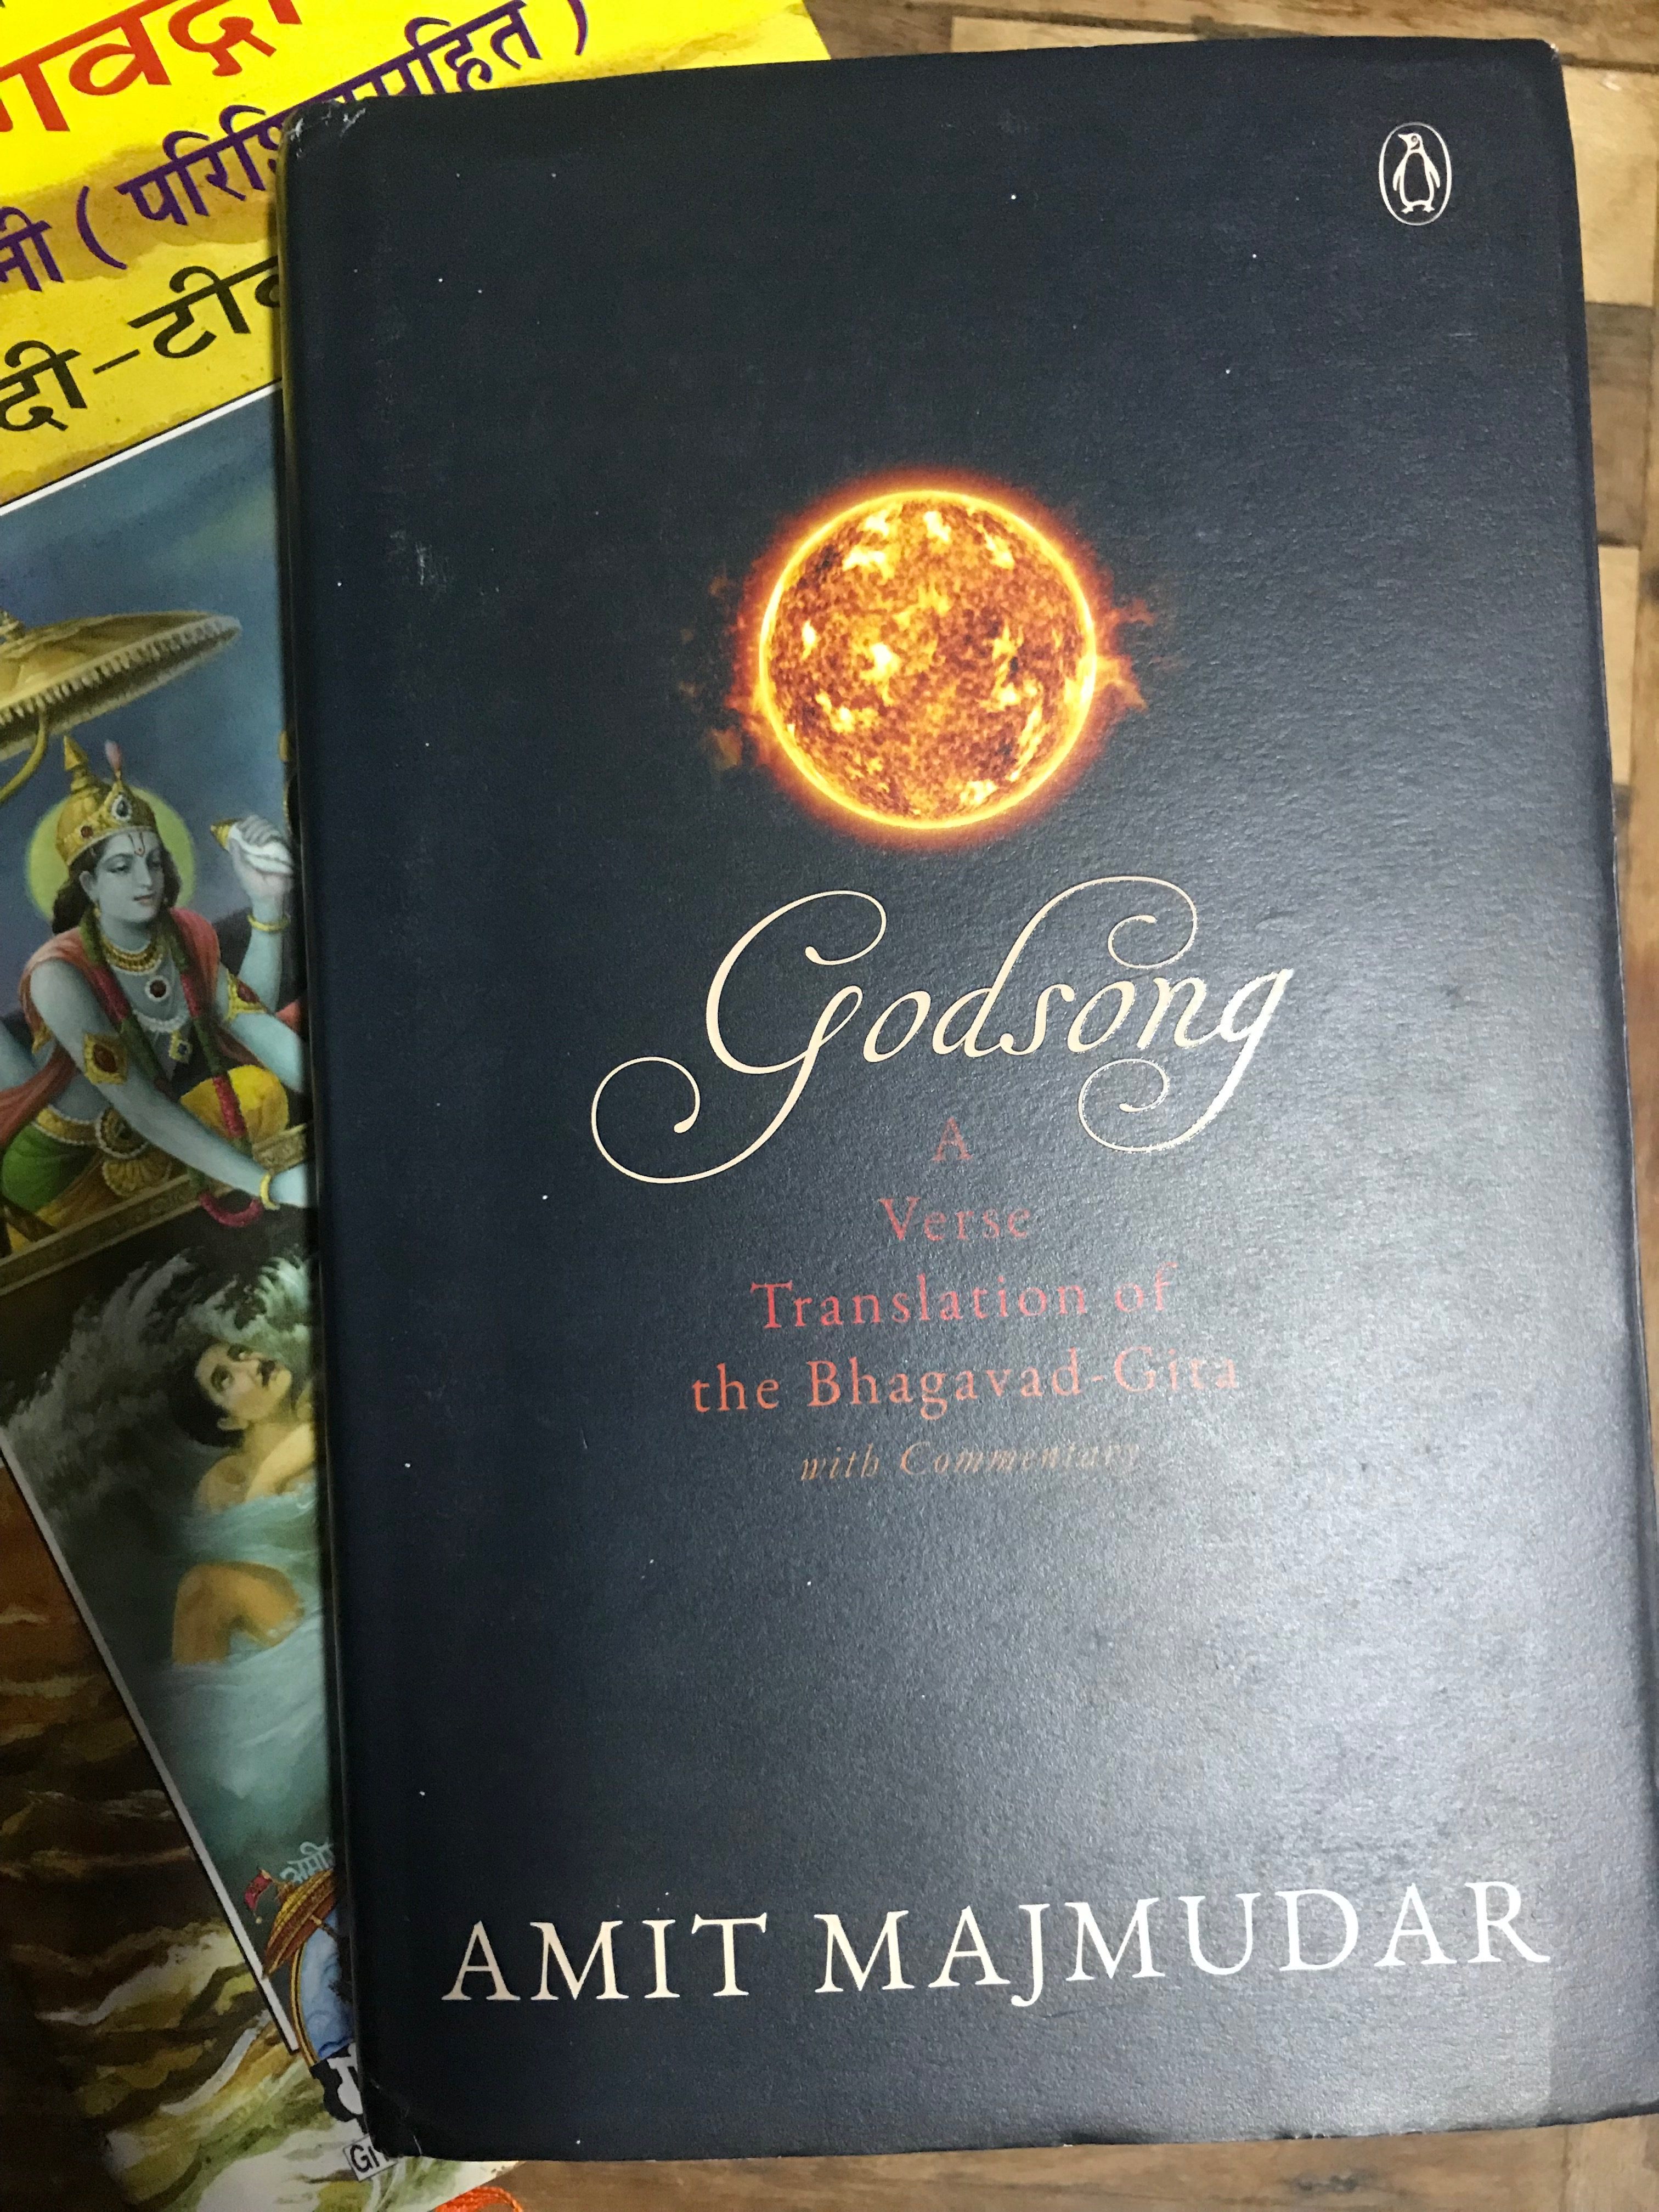 You are currently viewing Godsong, A verse translation of the Bhagavad Gita by Amit Majmudar